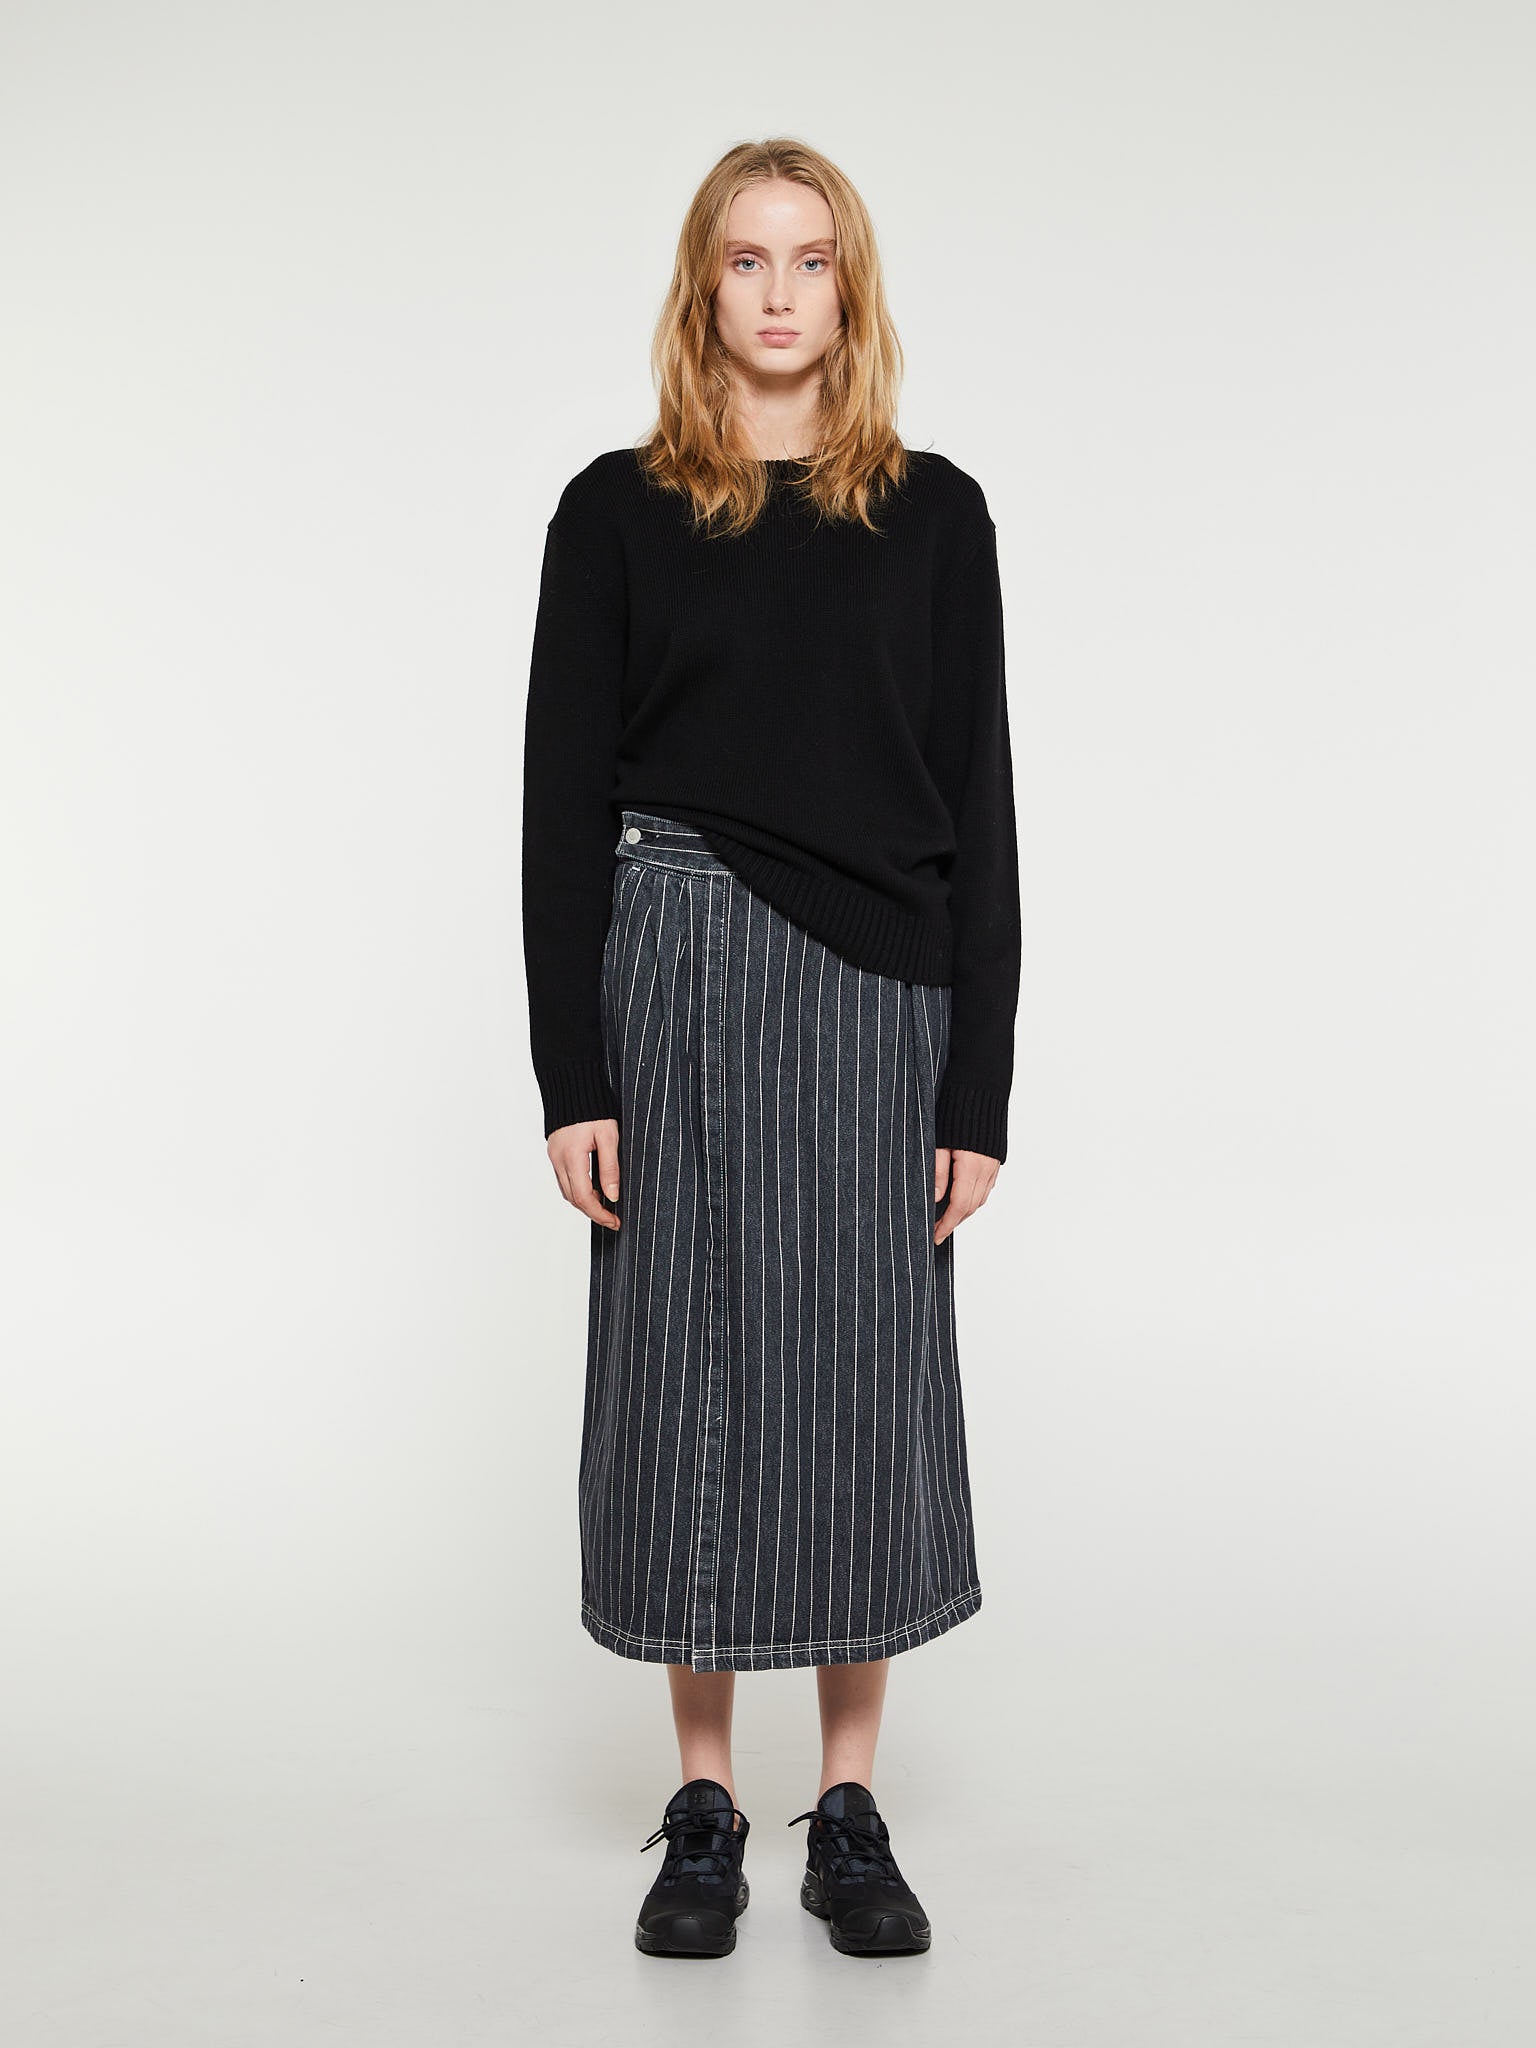 Carhartt WIP - W' Orlean Skirt in Black and White Stone Wash – stoy